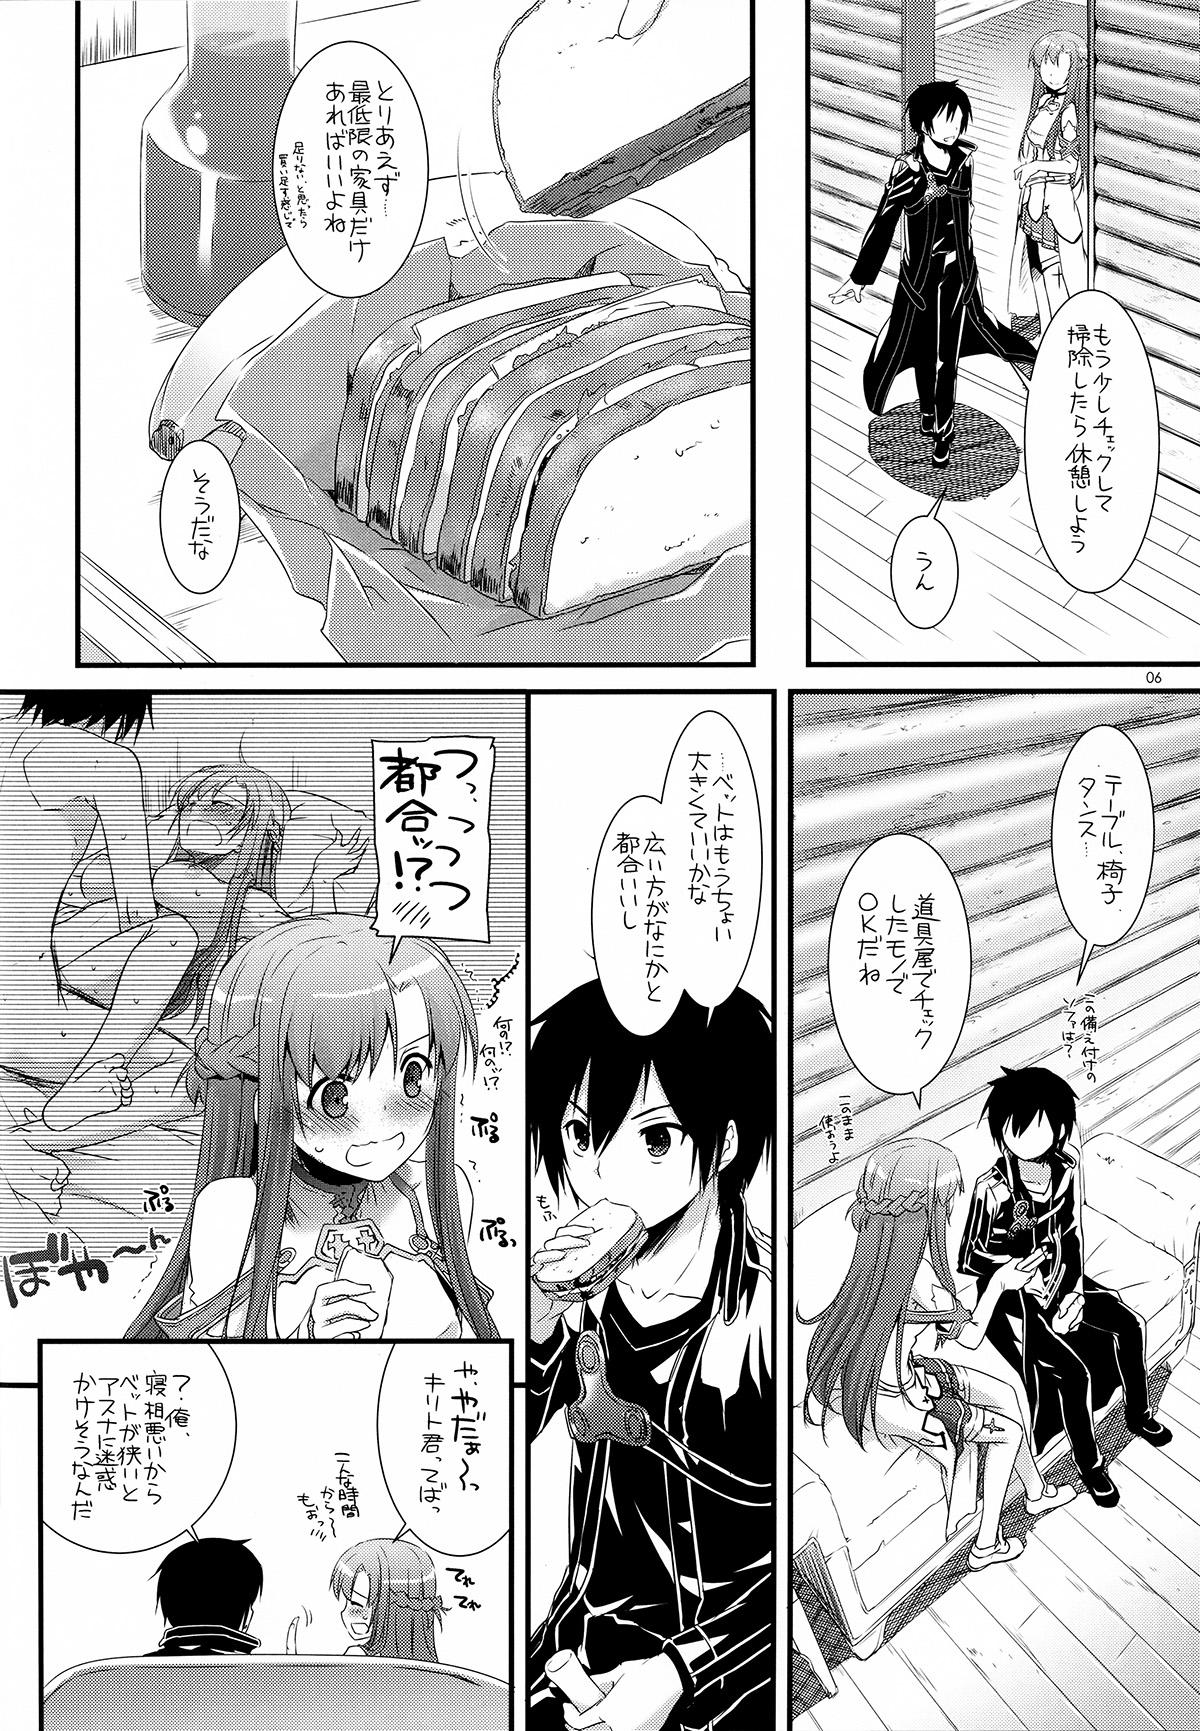 Gay Blondhair D.L.action 71 - Sword art online Dyke - Page 6